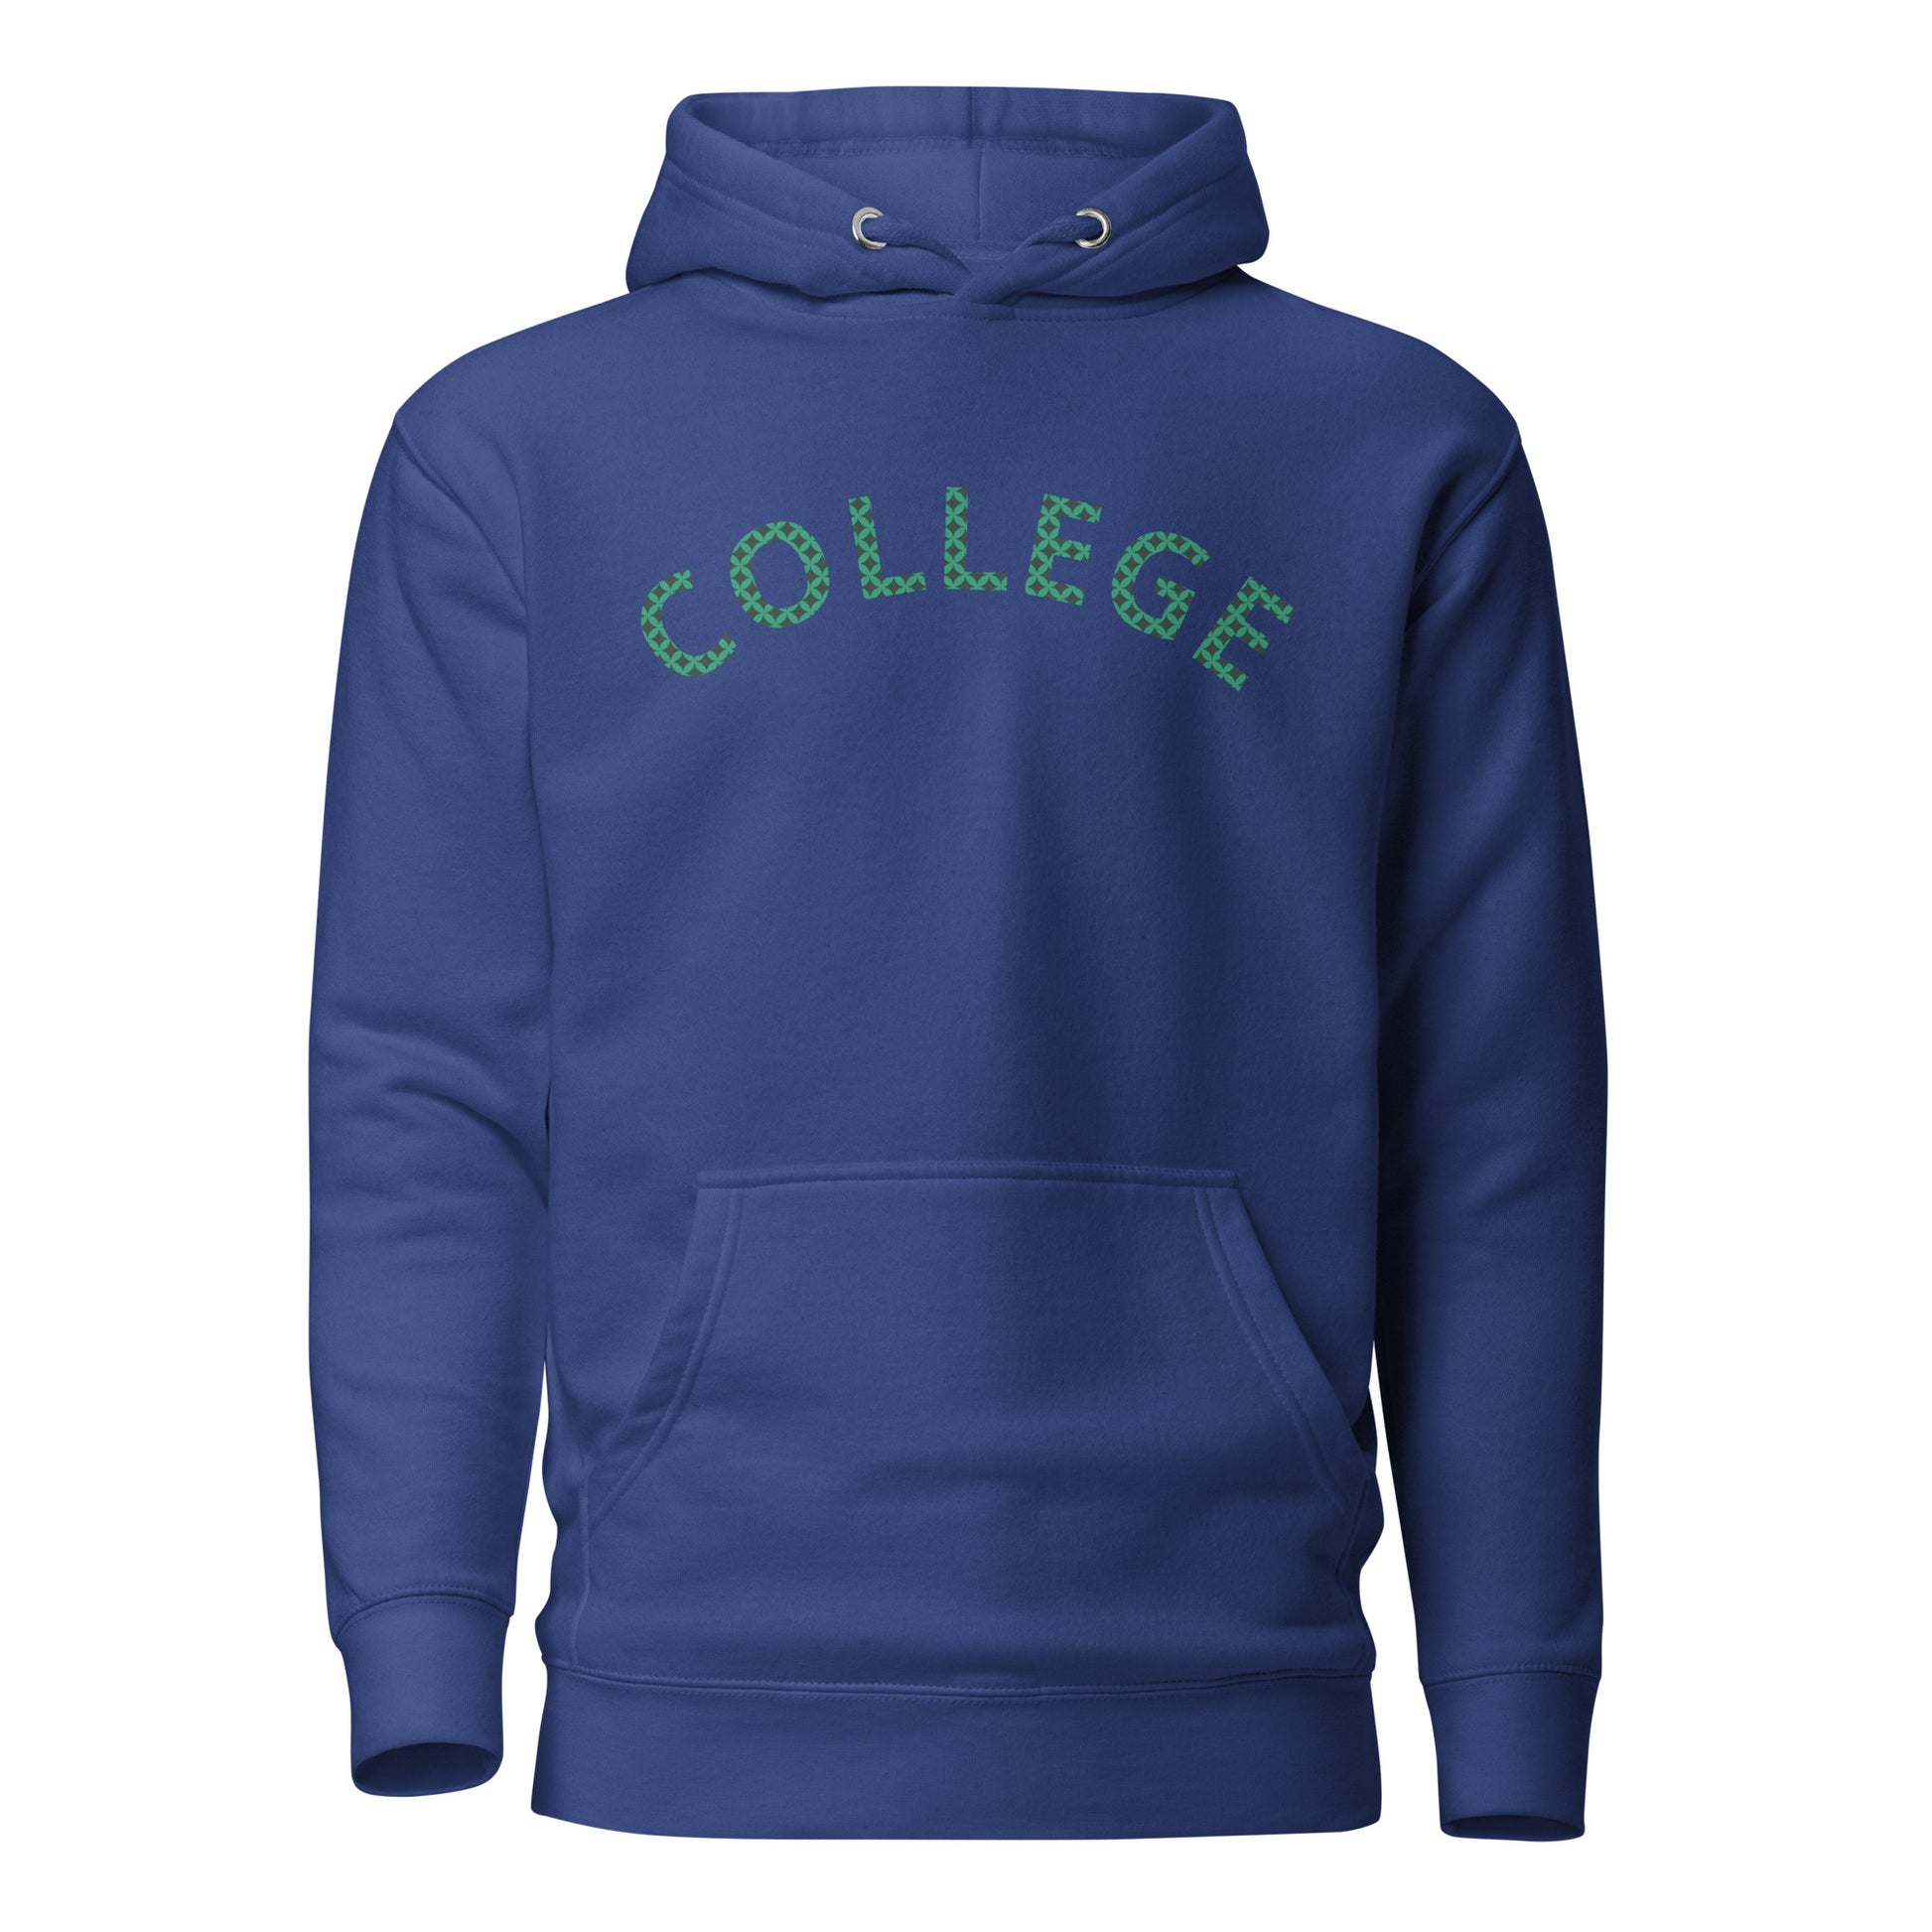 Royal Blue Sweatshirt that says 'College' across the chest 